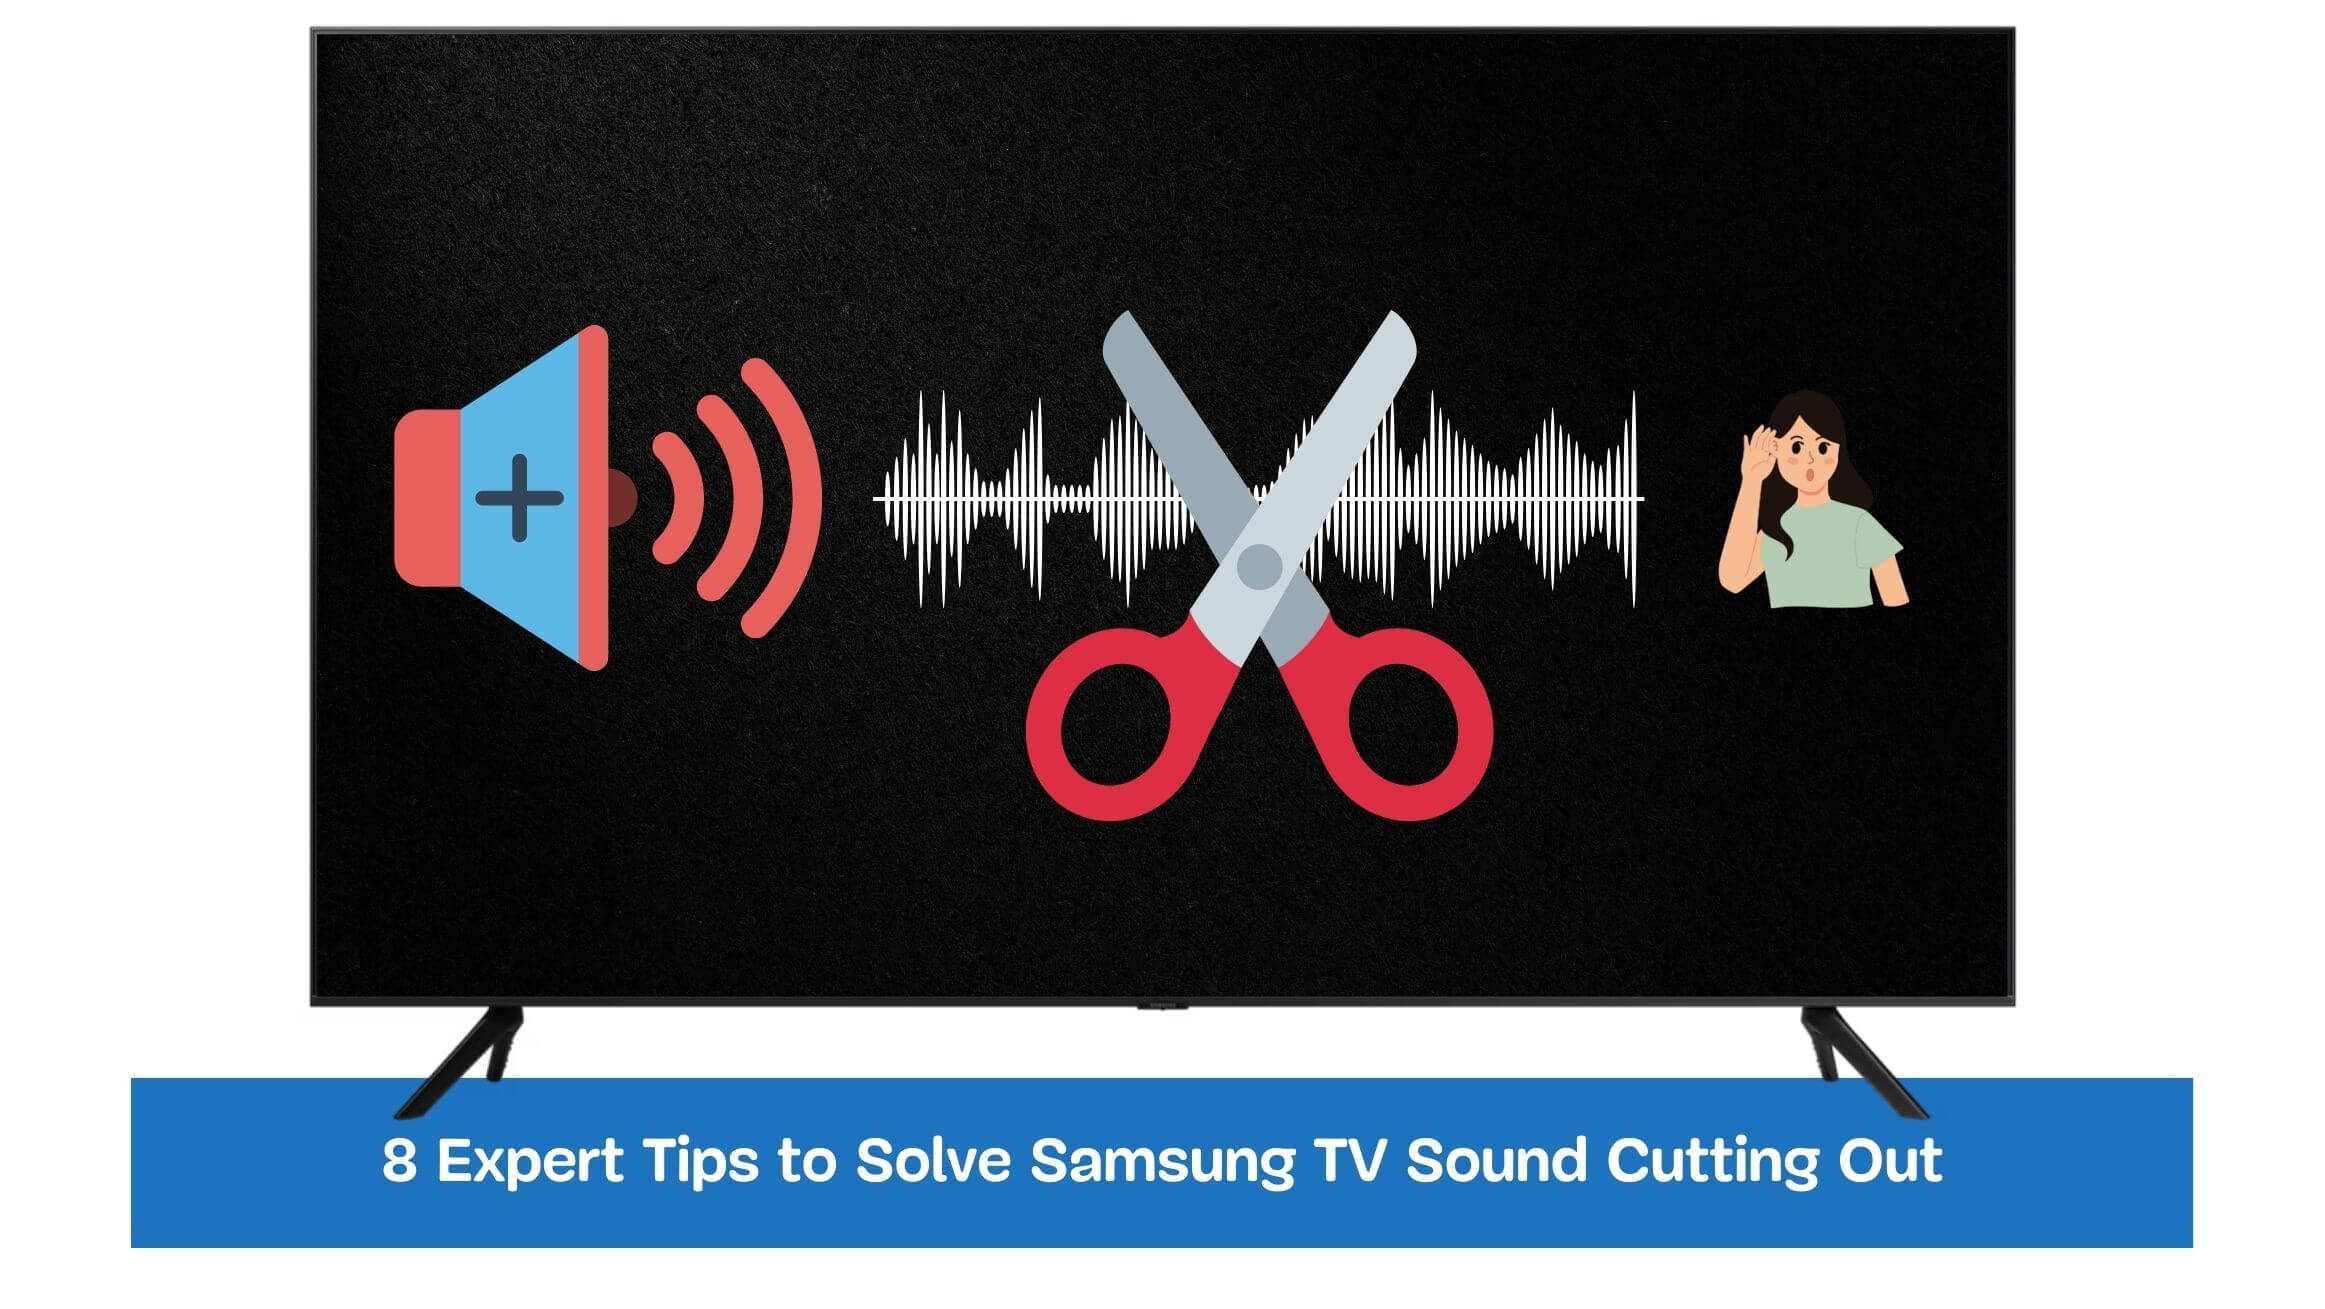 8 Expert Tips to Solve Samsung TV Sound Cutting Out